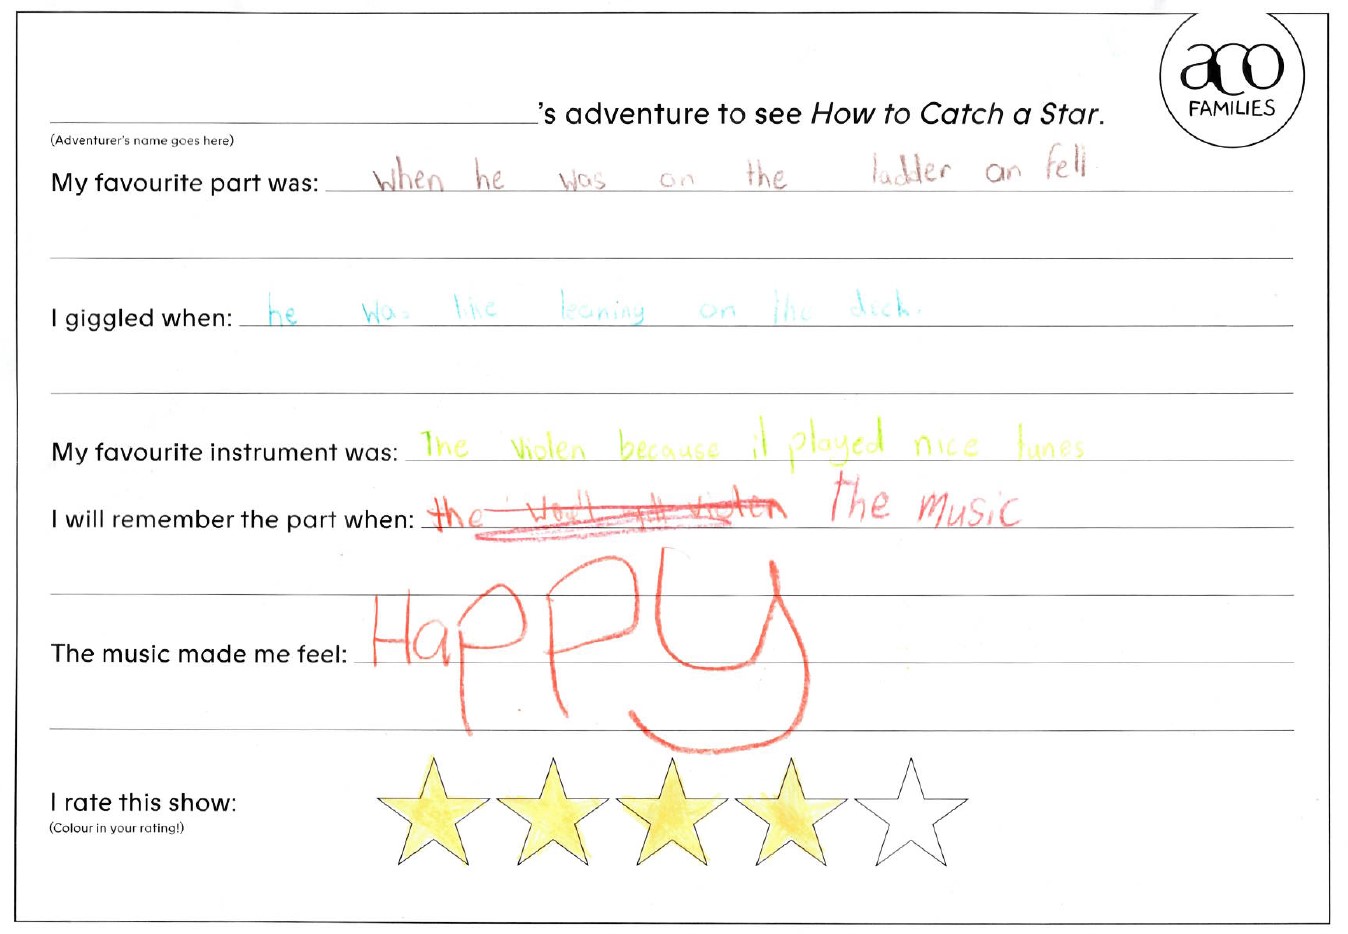 How to Catch a Star ACO Children's Review